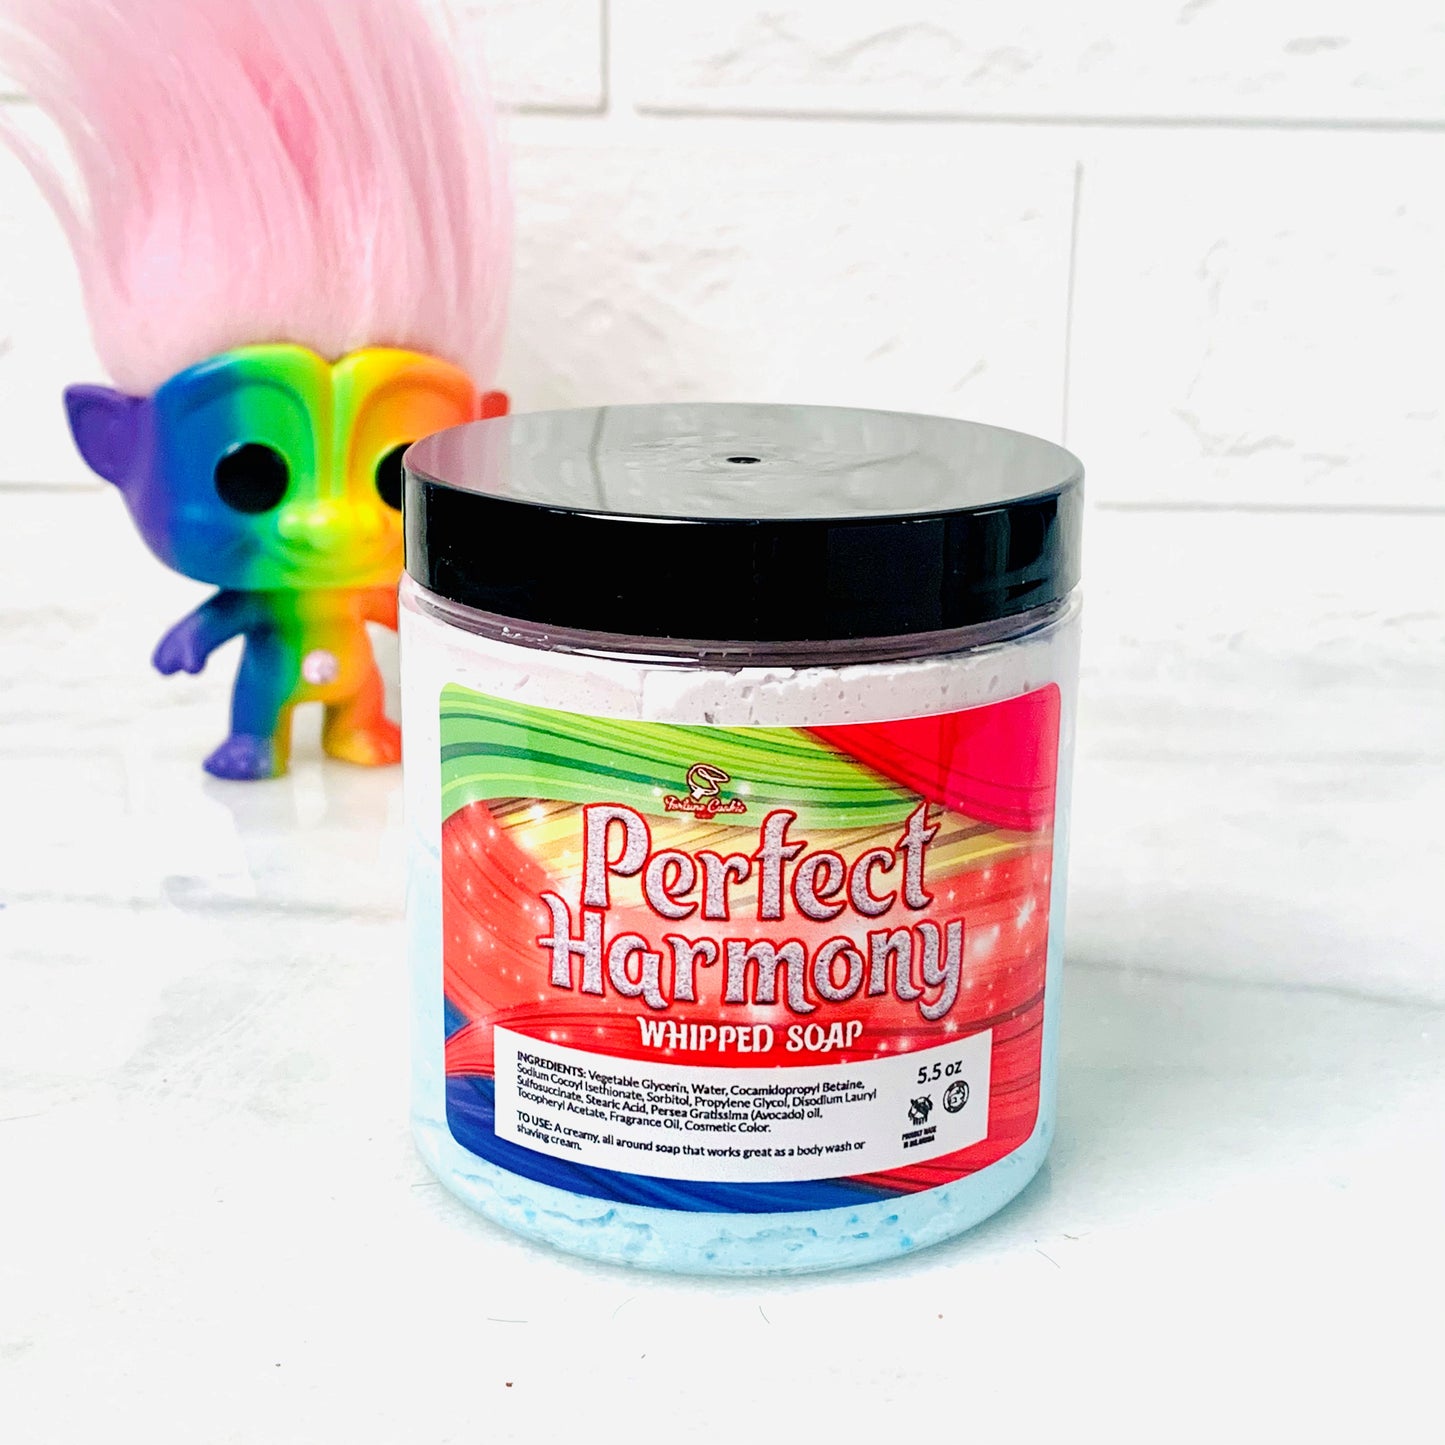 PERFECT HARMONY Whipped Soap